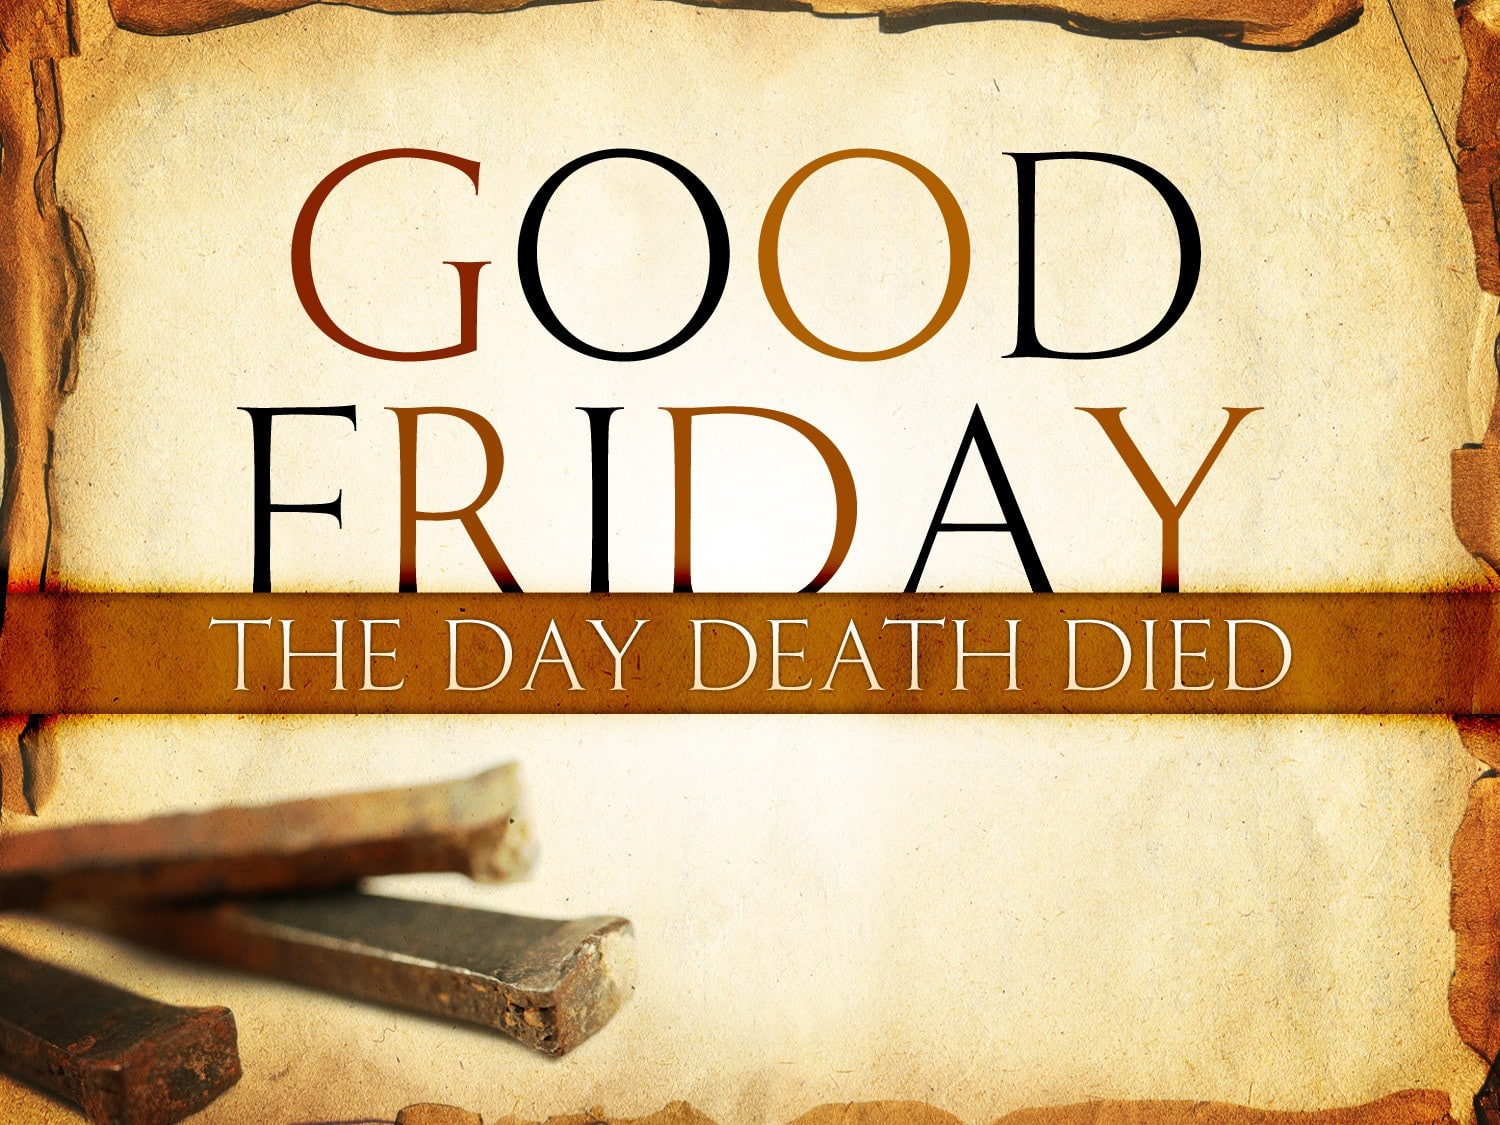 HD Images of Good Friday